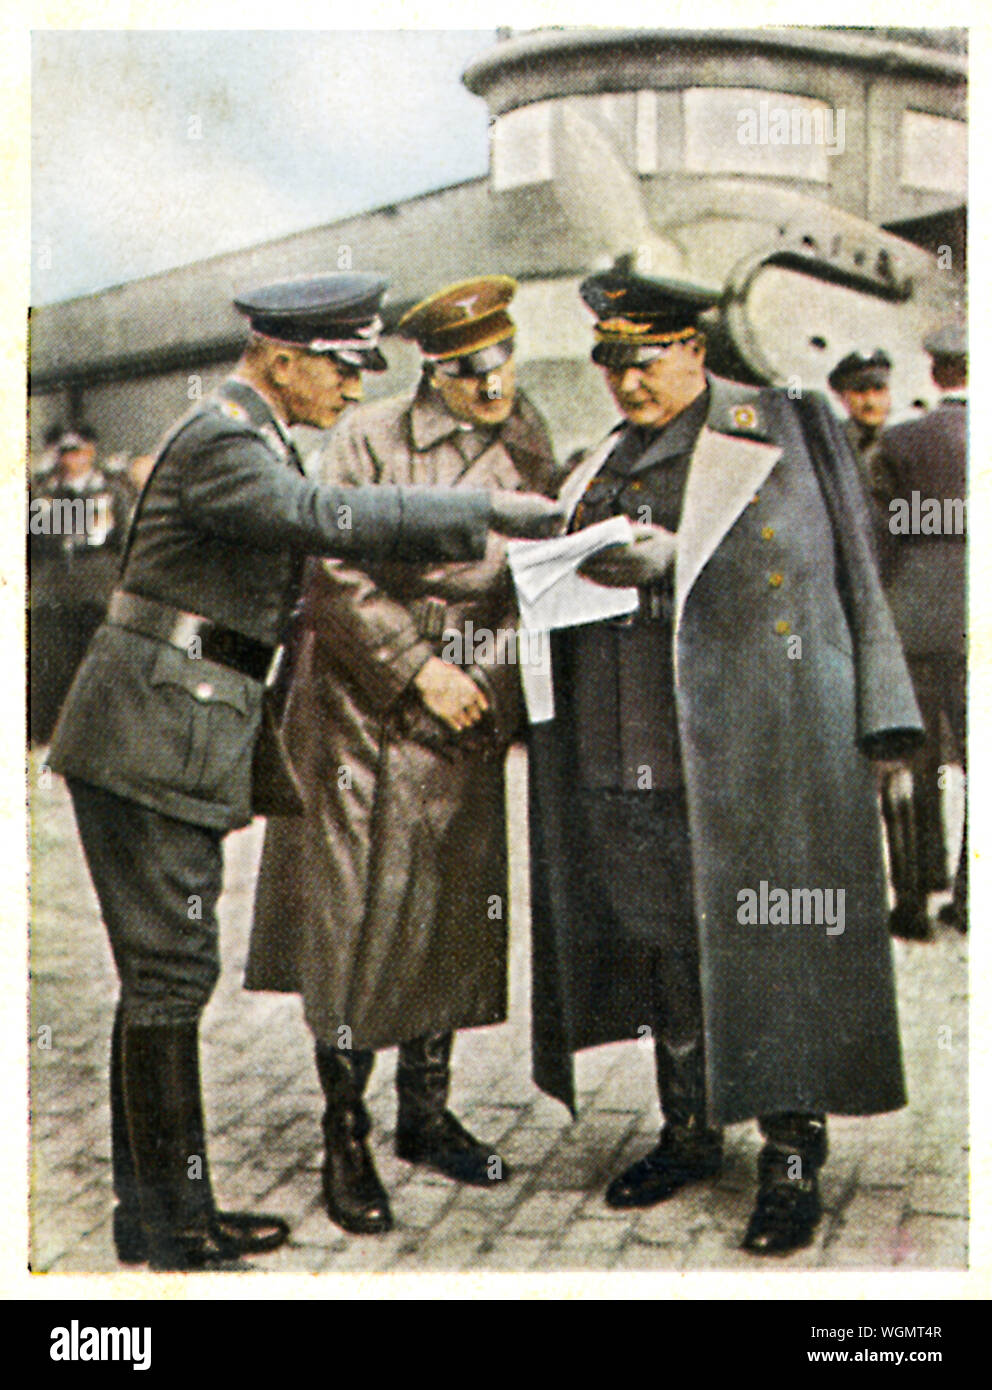 Luftwaffe, Hitler and Goering, 1936 cigarette card of the Führer and Reichsmarshall Herman Göring at a demonstration of the German Air Force Stock Photo